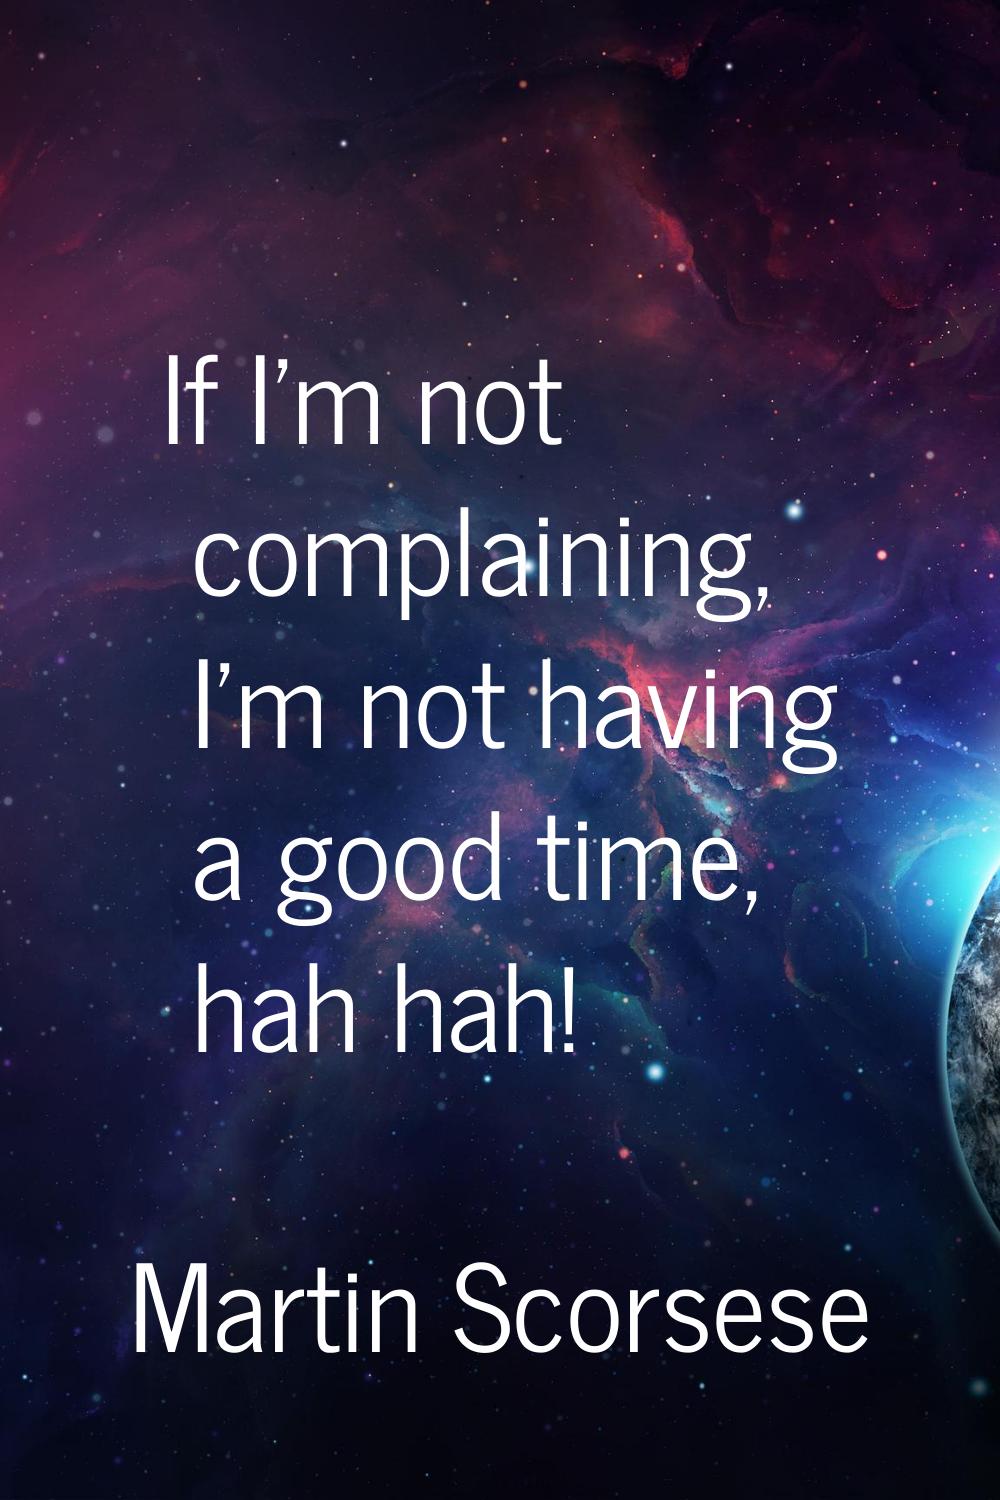 If I'm not complaining, I'm not having a good time, hah hah!